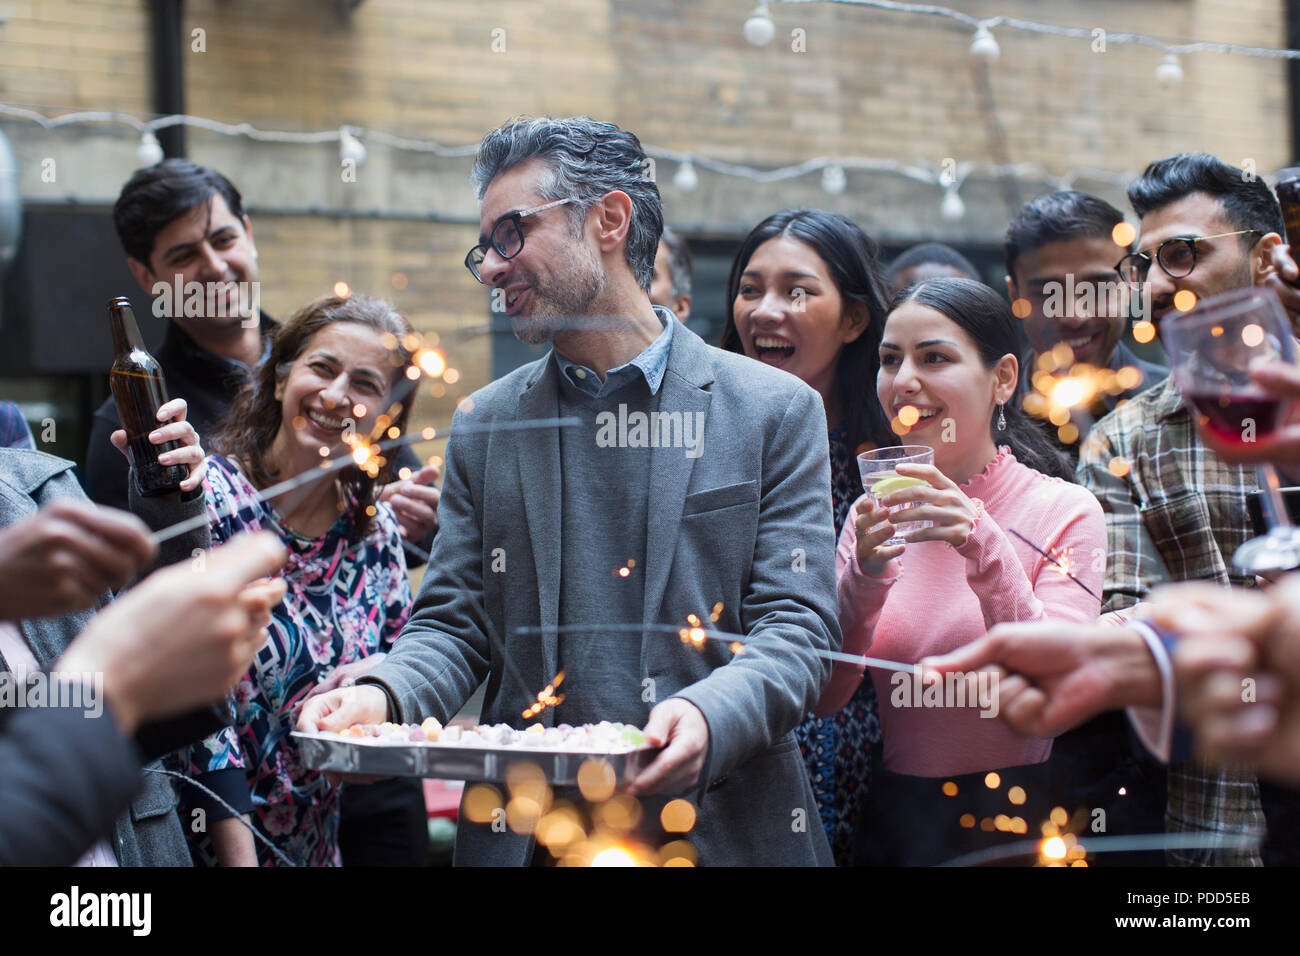 Friends with sparklers celebrating with man holding birthday cake Stock Photo